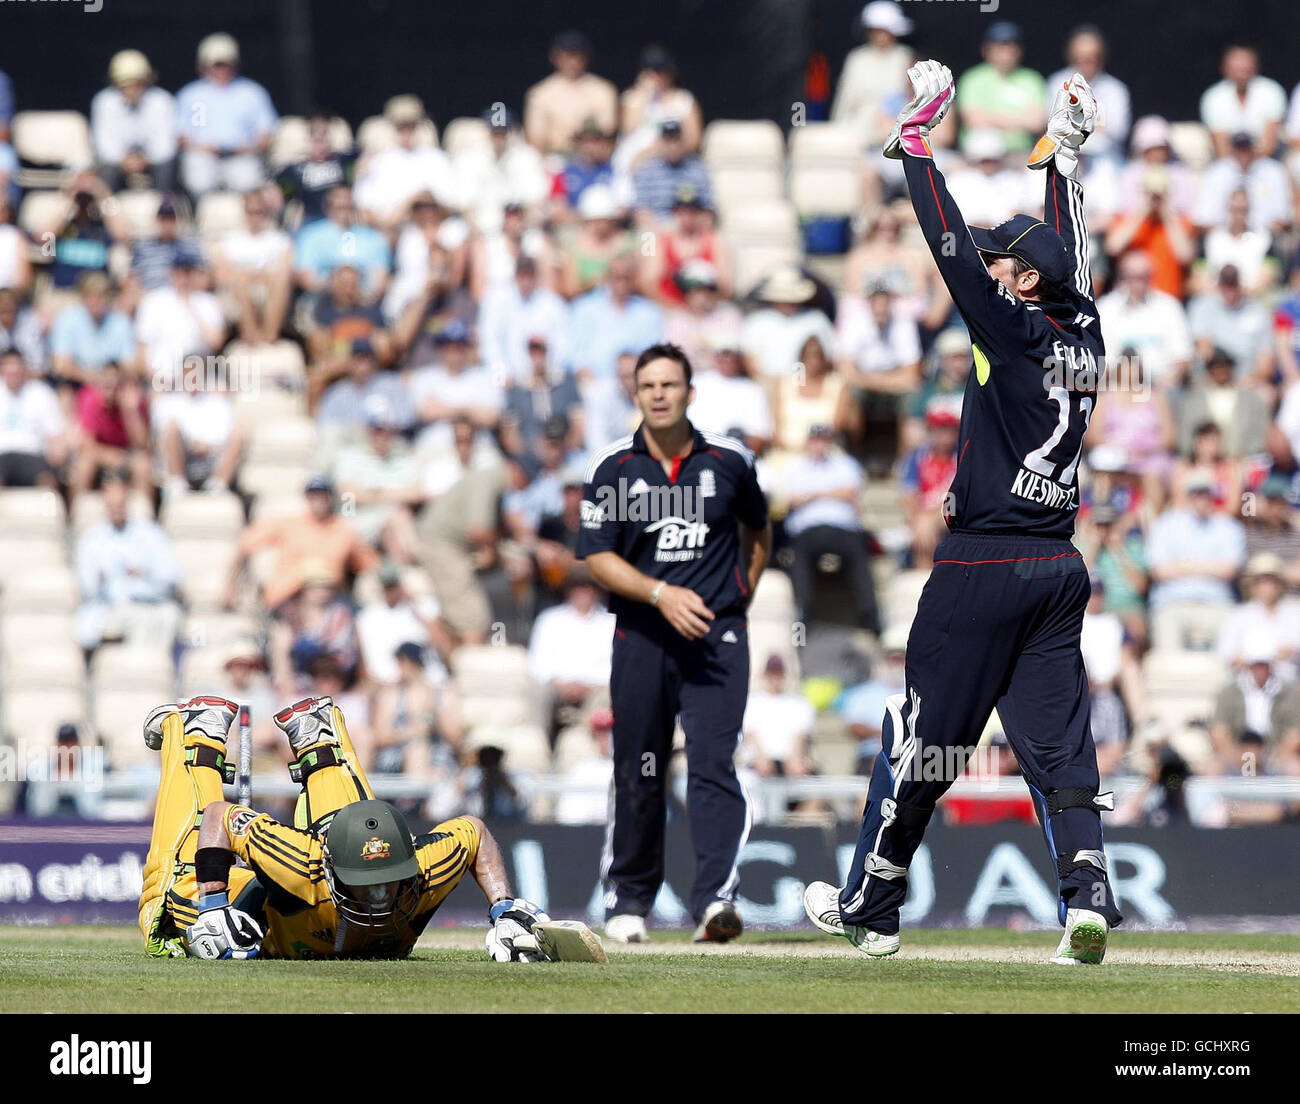 Australia's Michael Hussey (floor) survives a run out attempt during the First Natwest One Day International match at the Rose Bowl, Southampton. Stock Photo